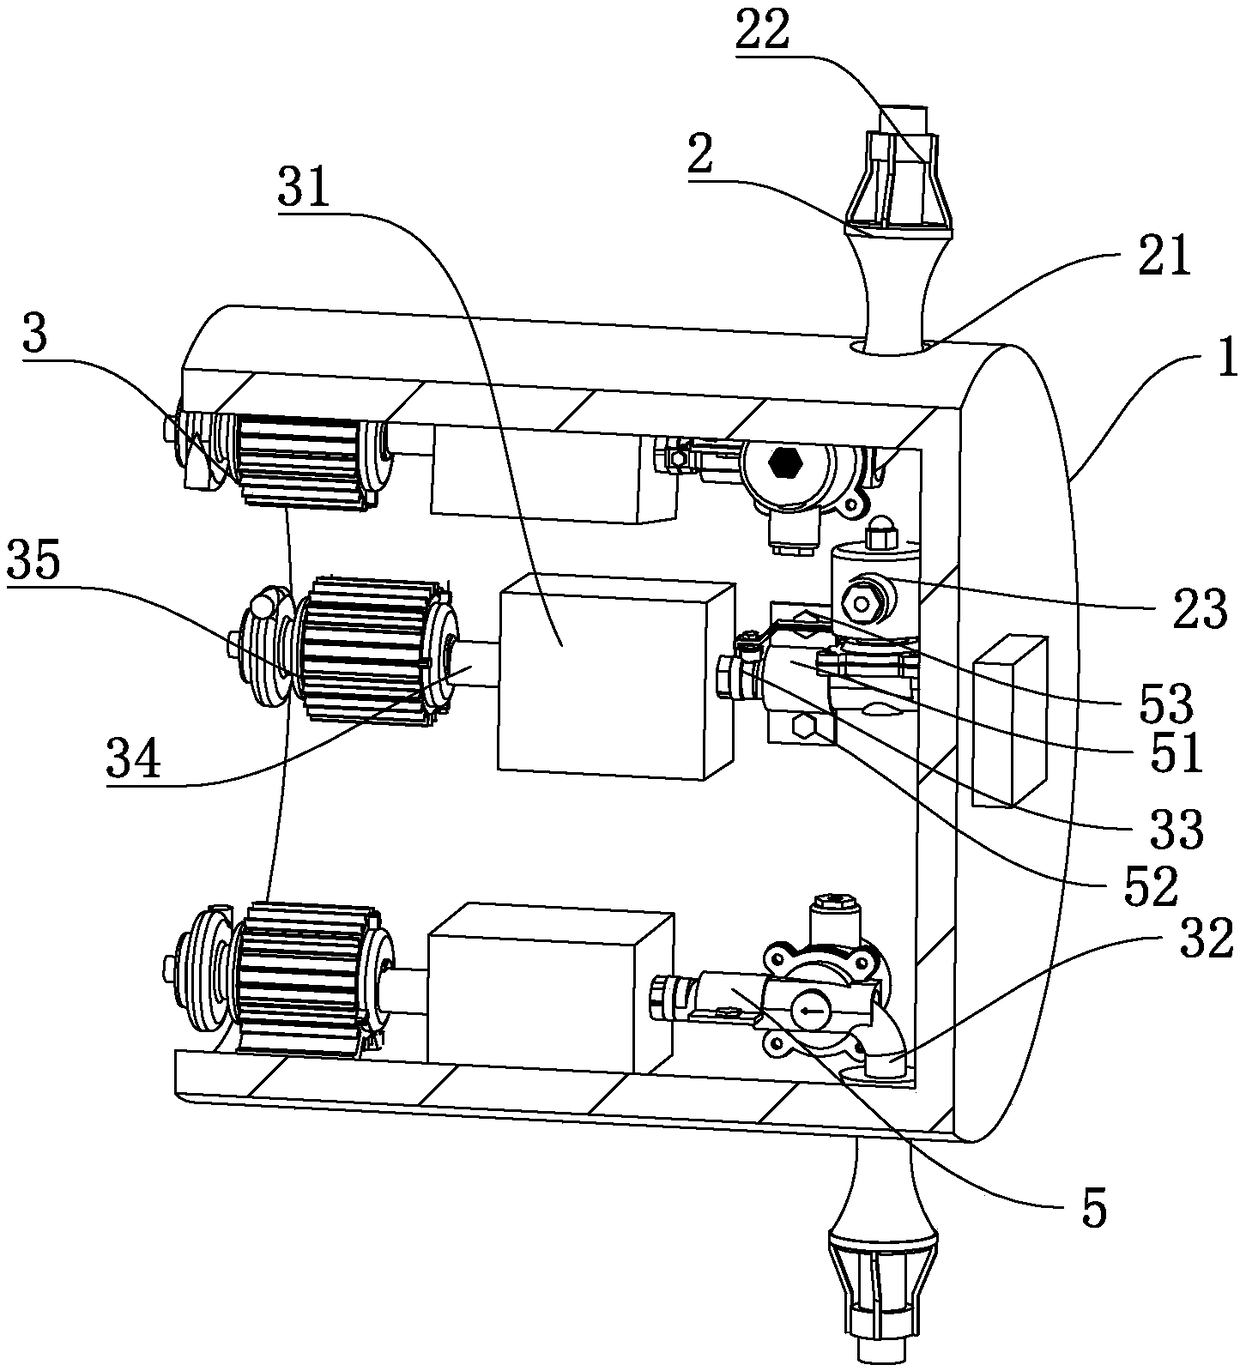 Jetting roller capable of achieving solution uniform distribution